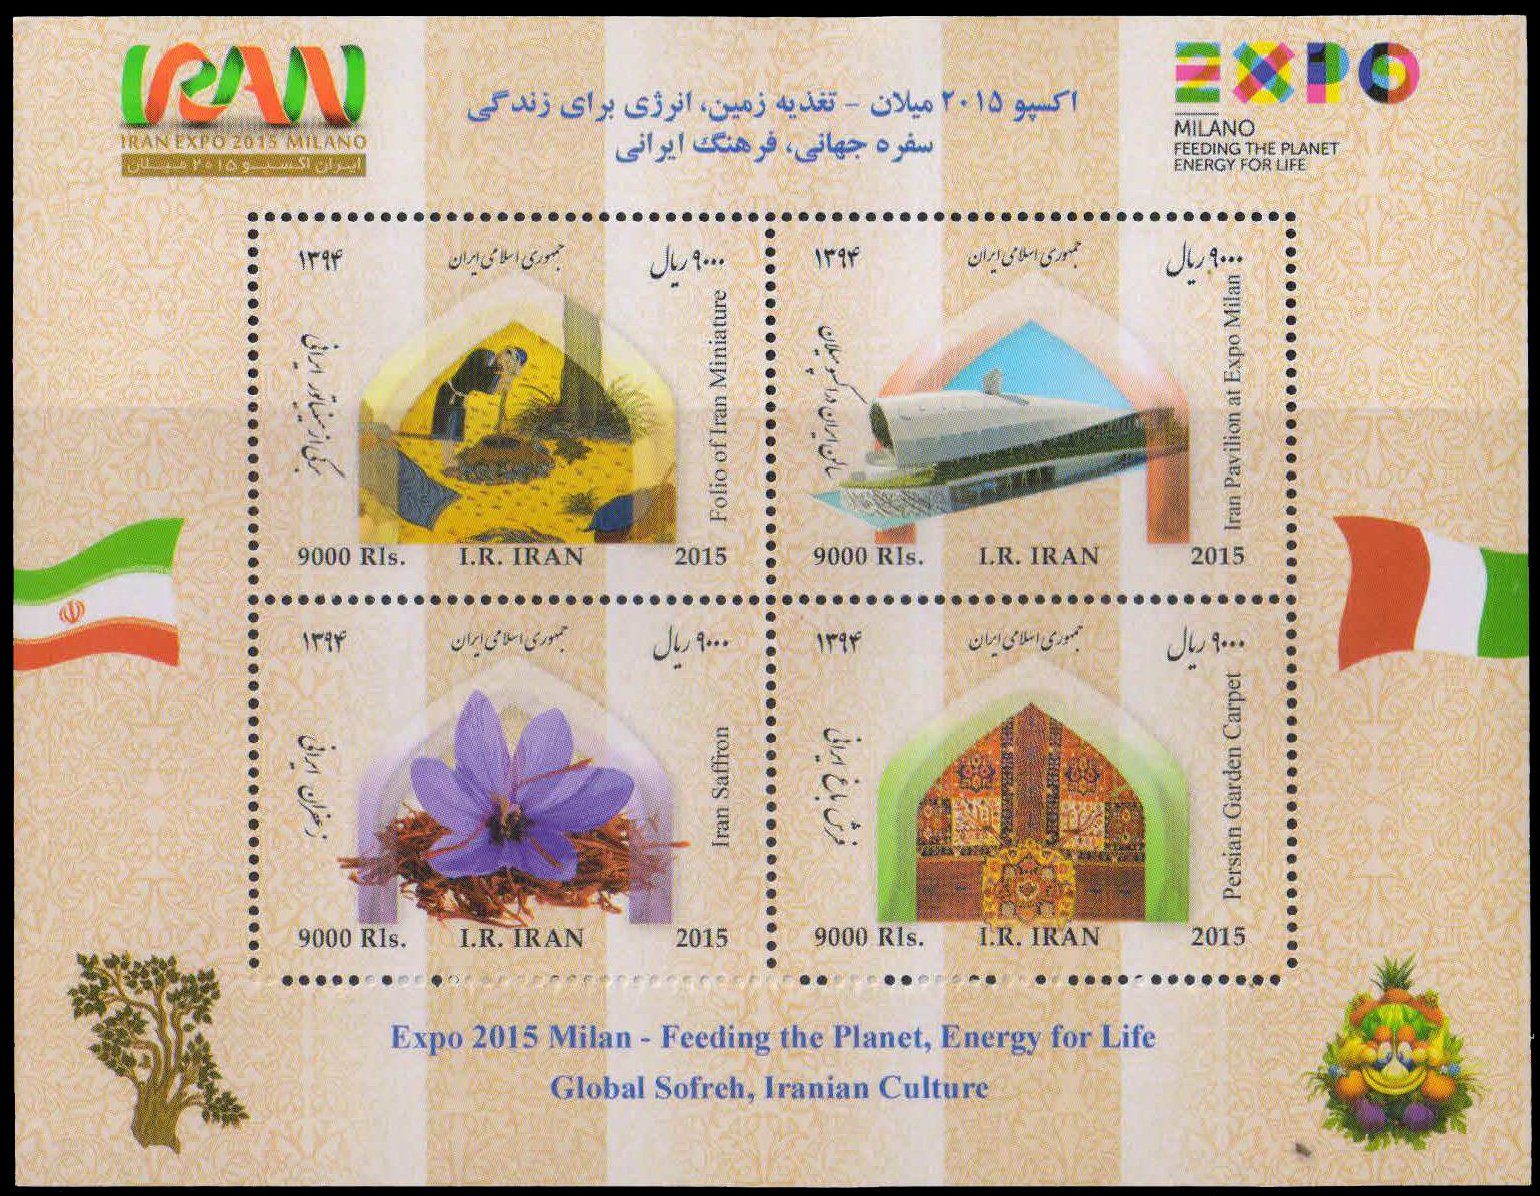 IRAN 2015-Iran Expo 2015 Miland-Feeding the Planet, Energy for Life Global Sofreh, Iranian Culture, Sheet of 4, MNH, Cat � 48-